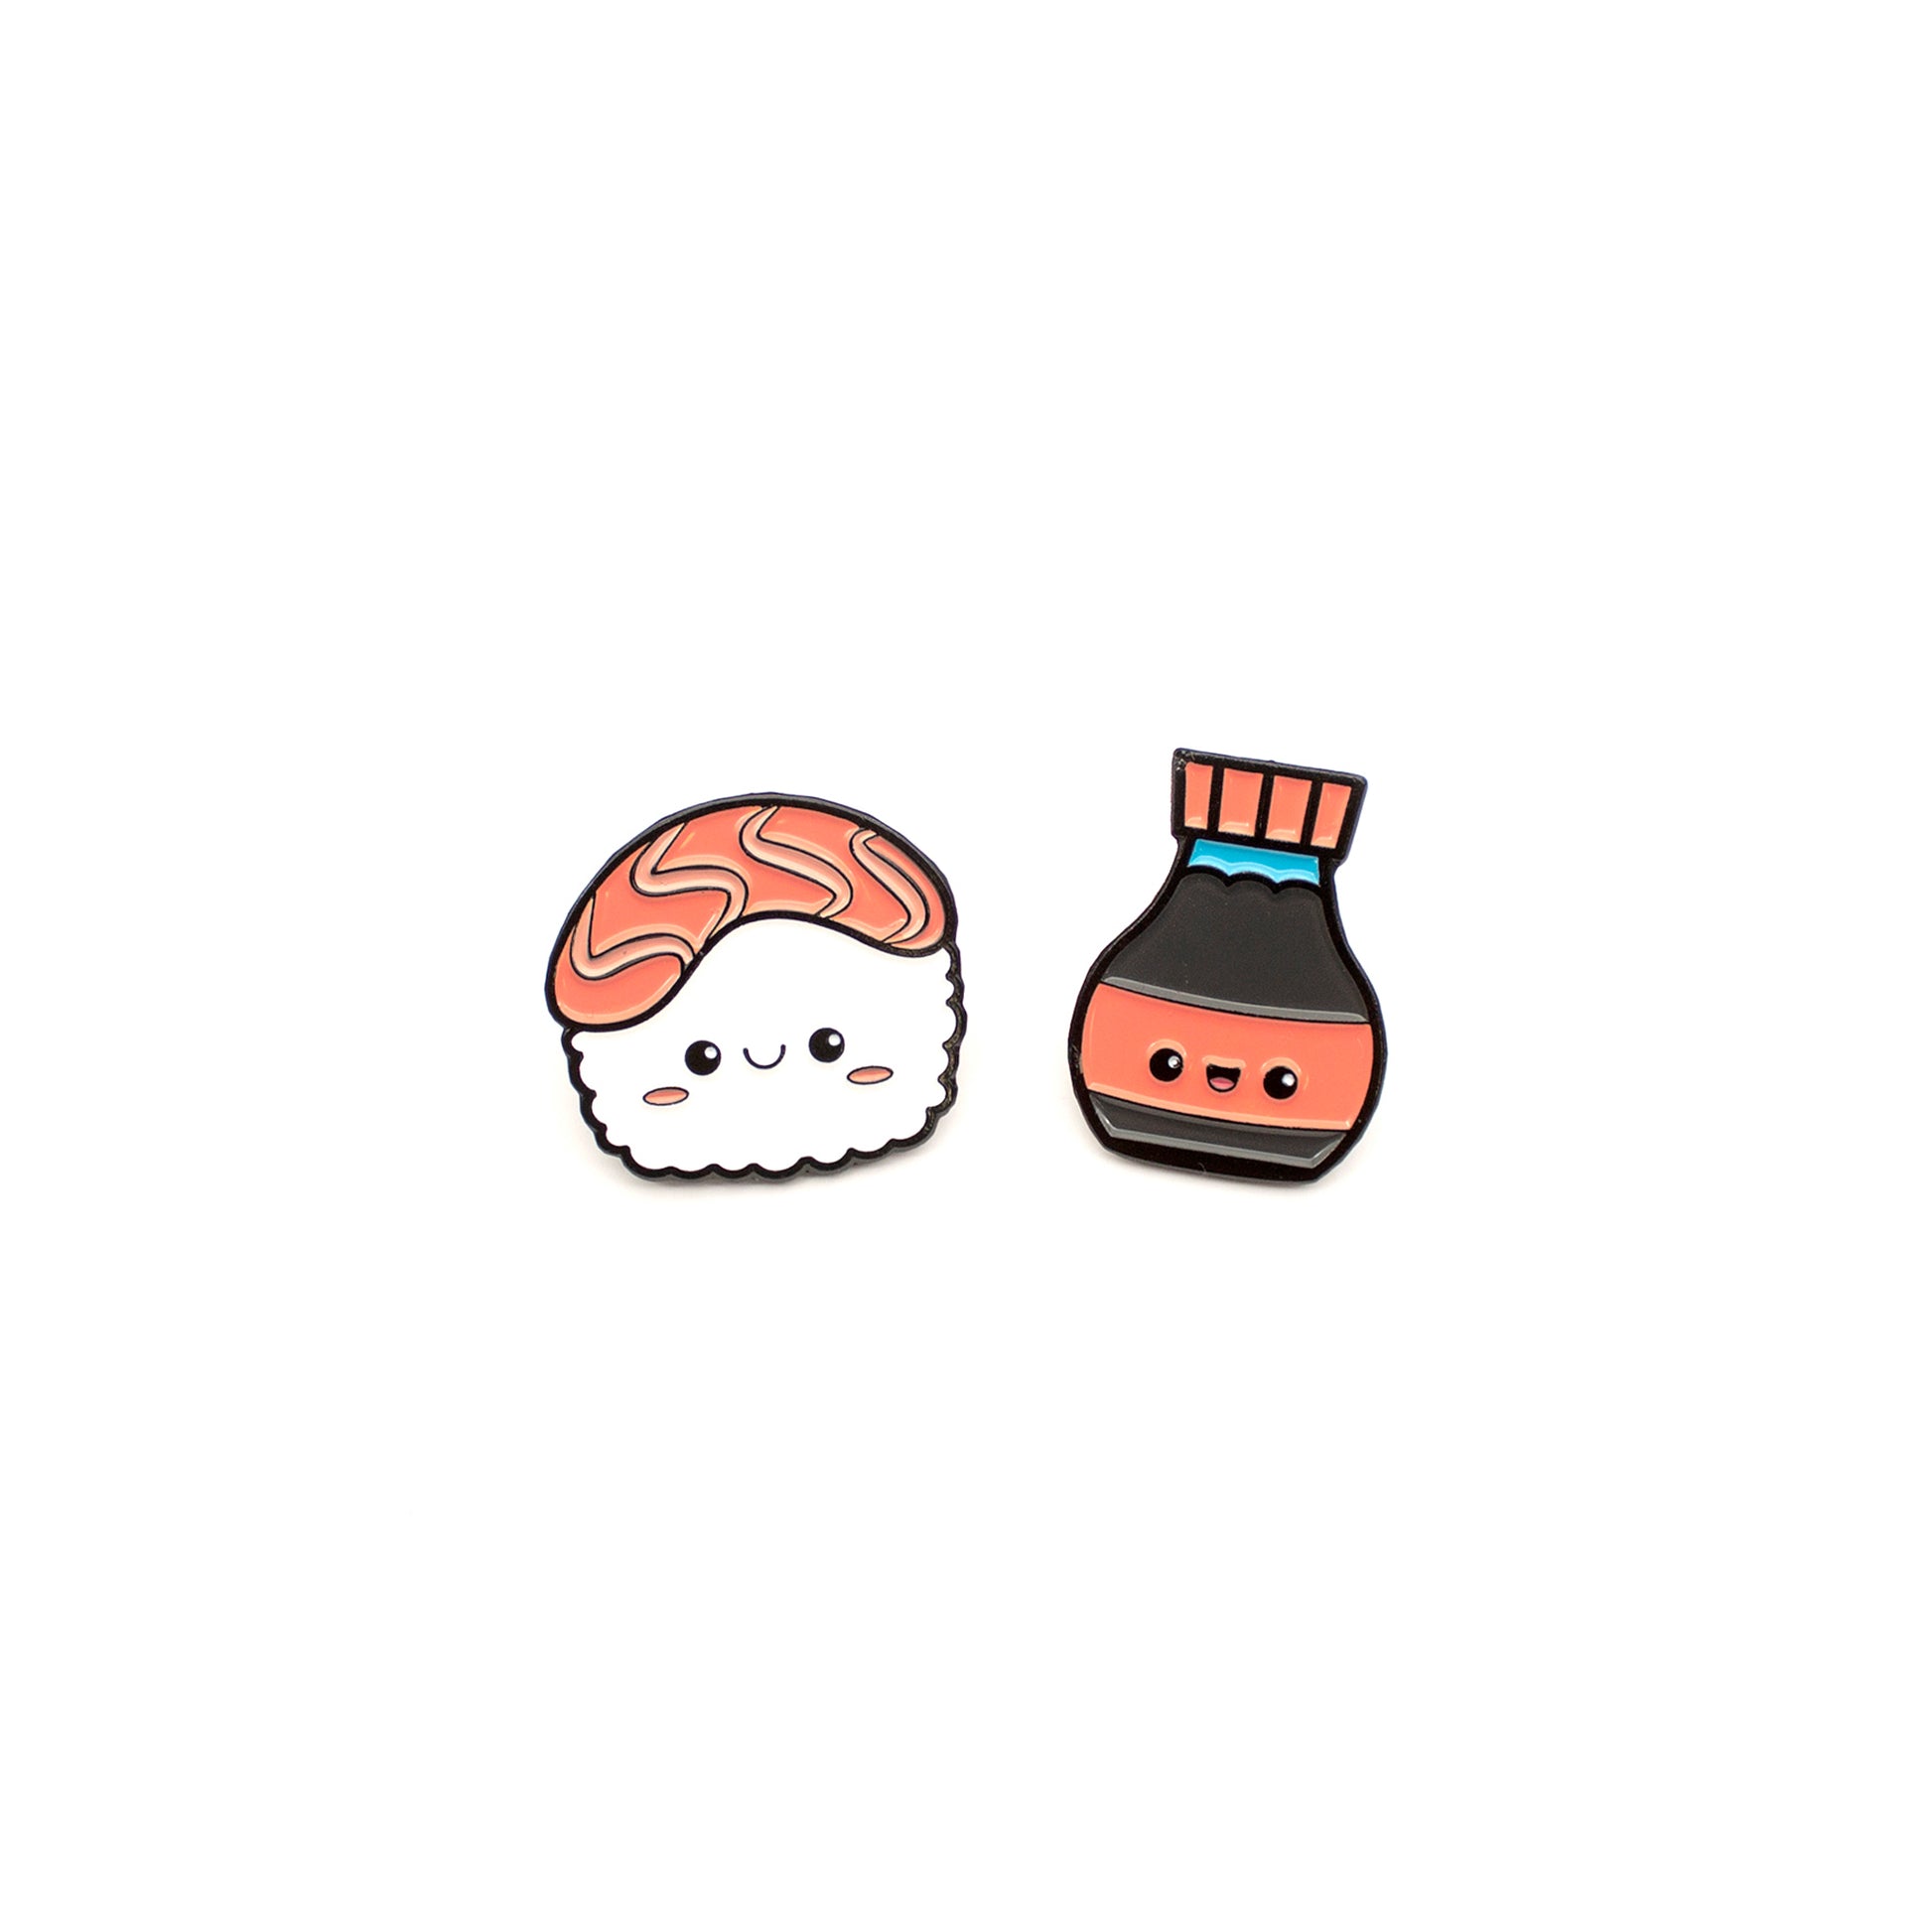 Sushi and Soy Sauce enamel pins on white background